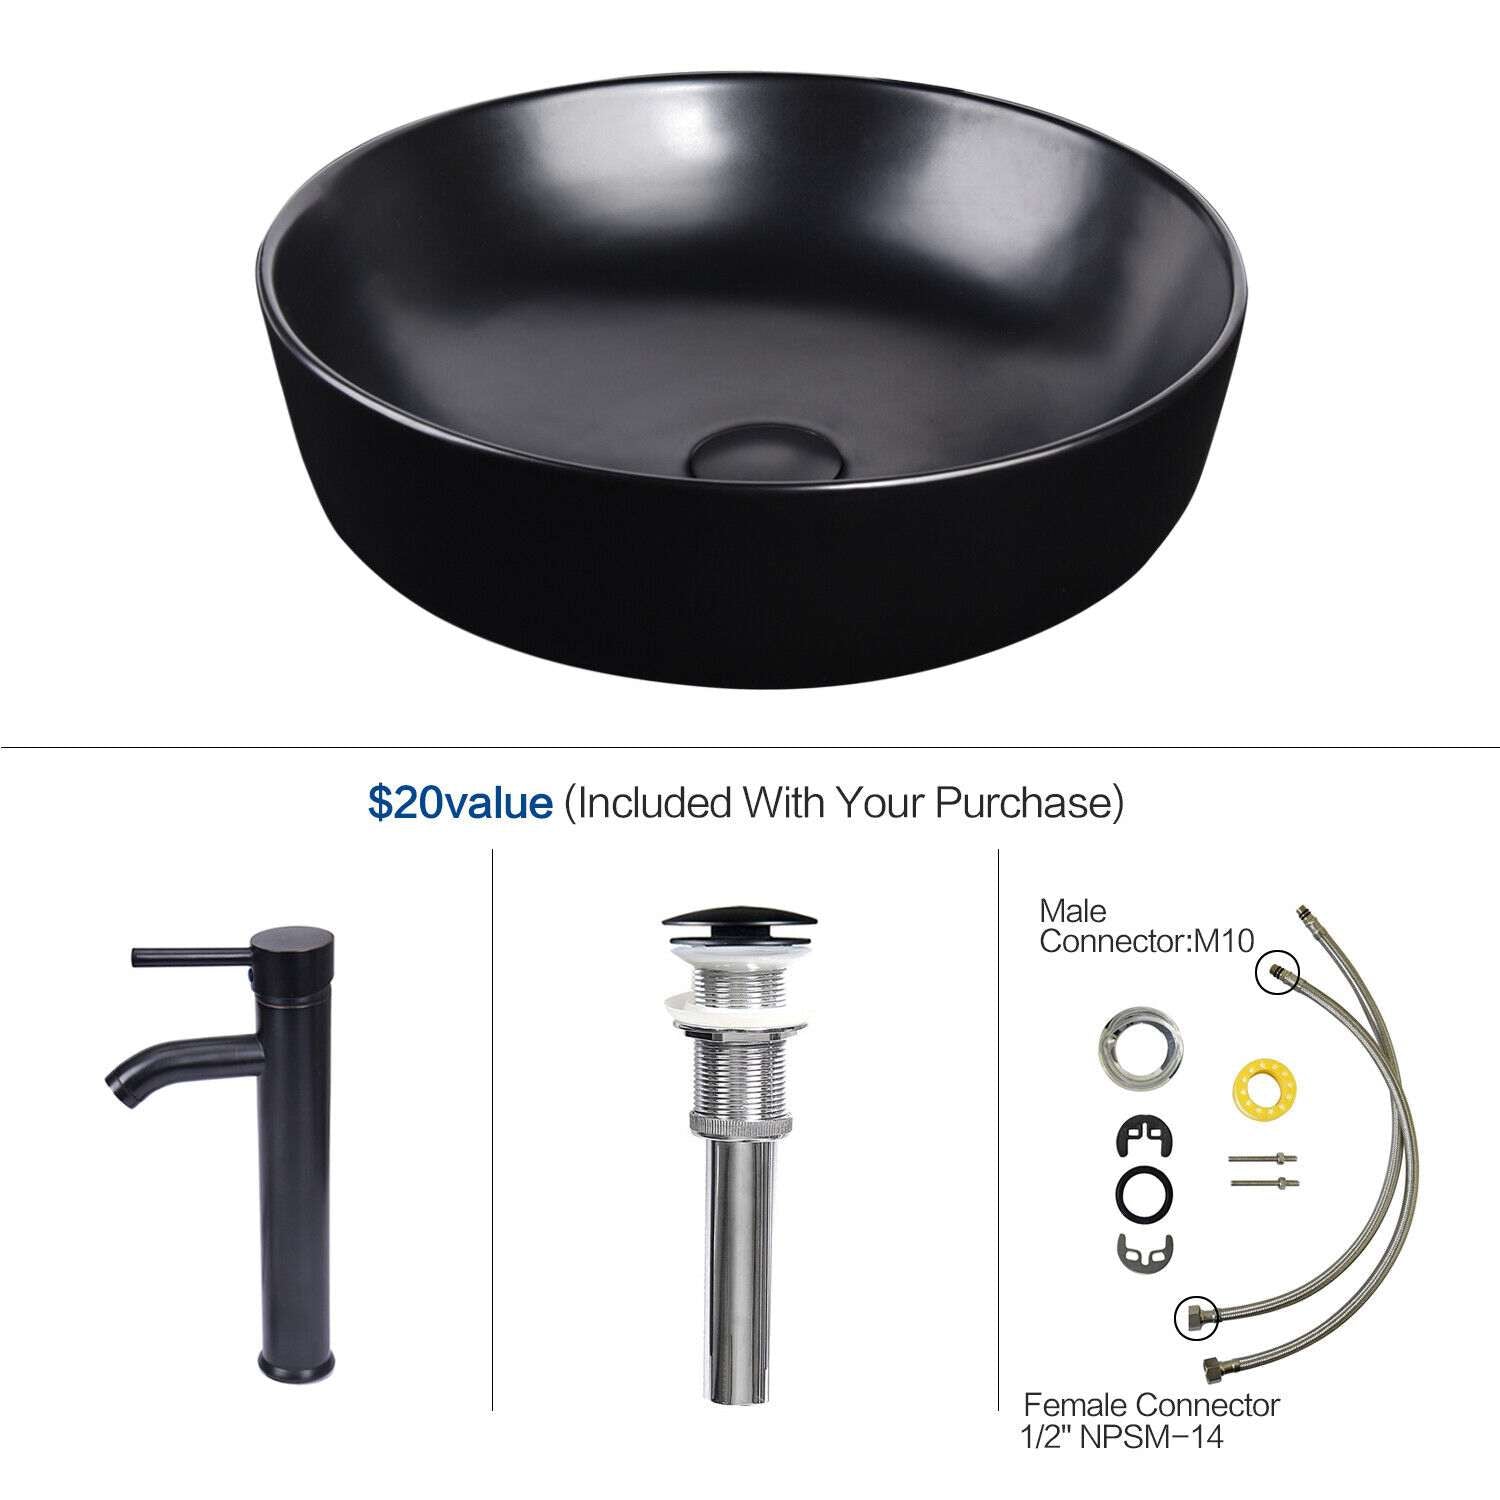 Elecwish round black sink included parts